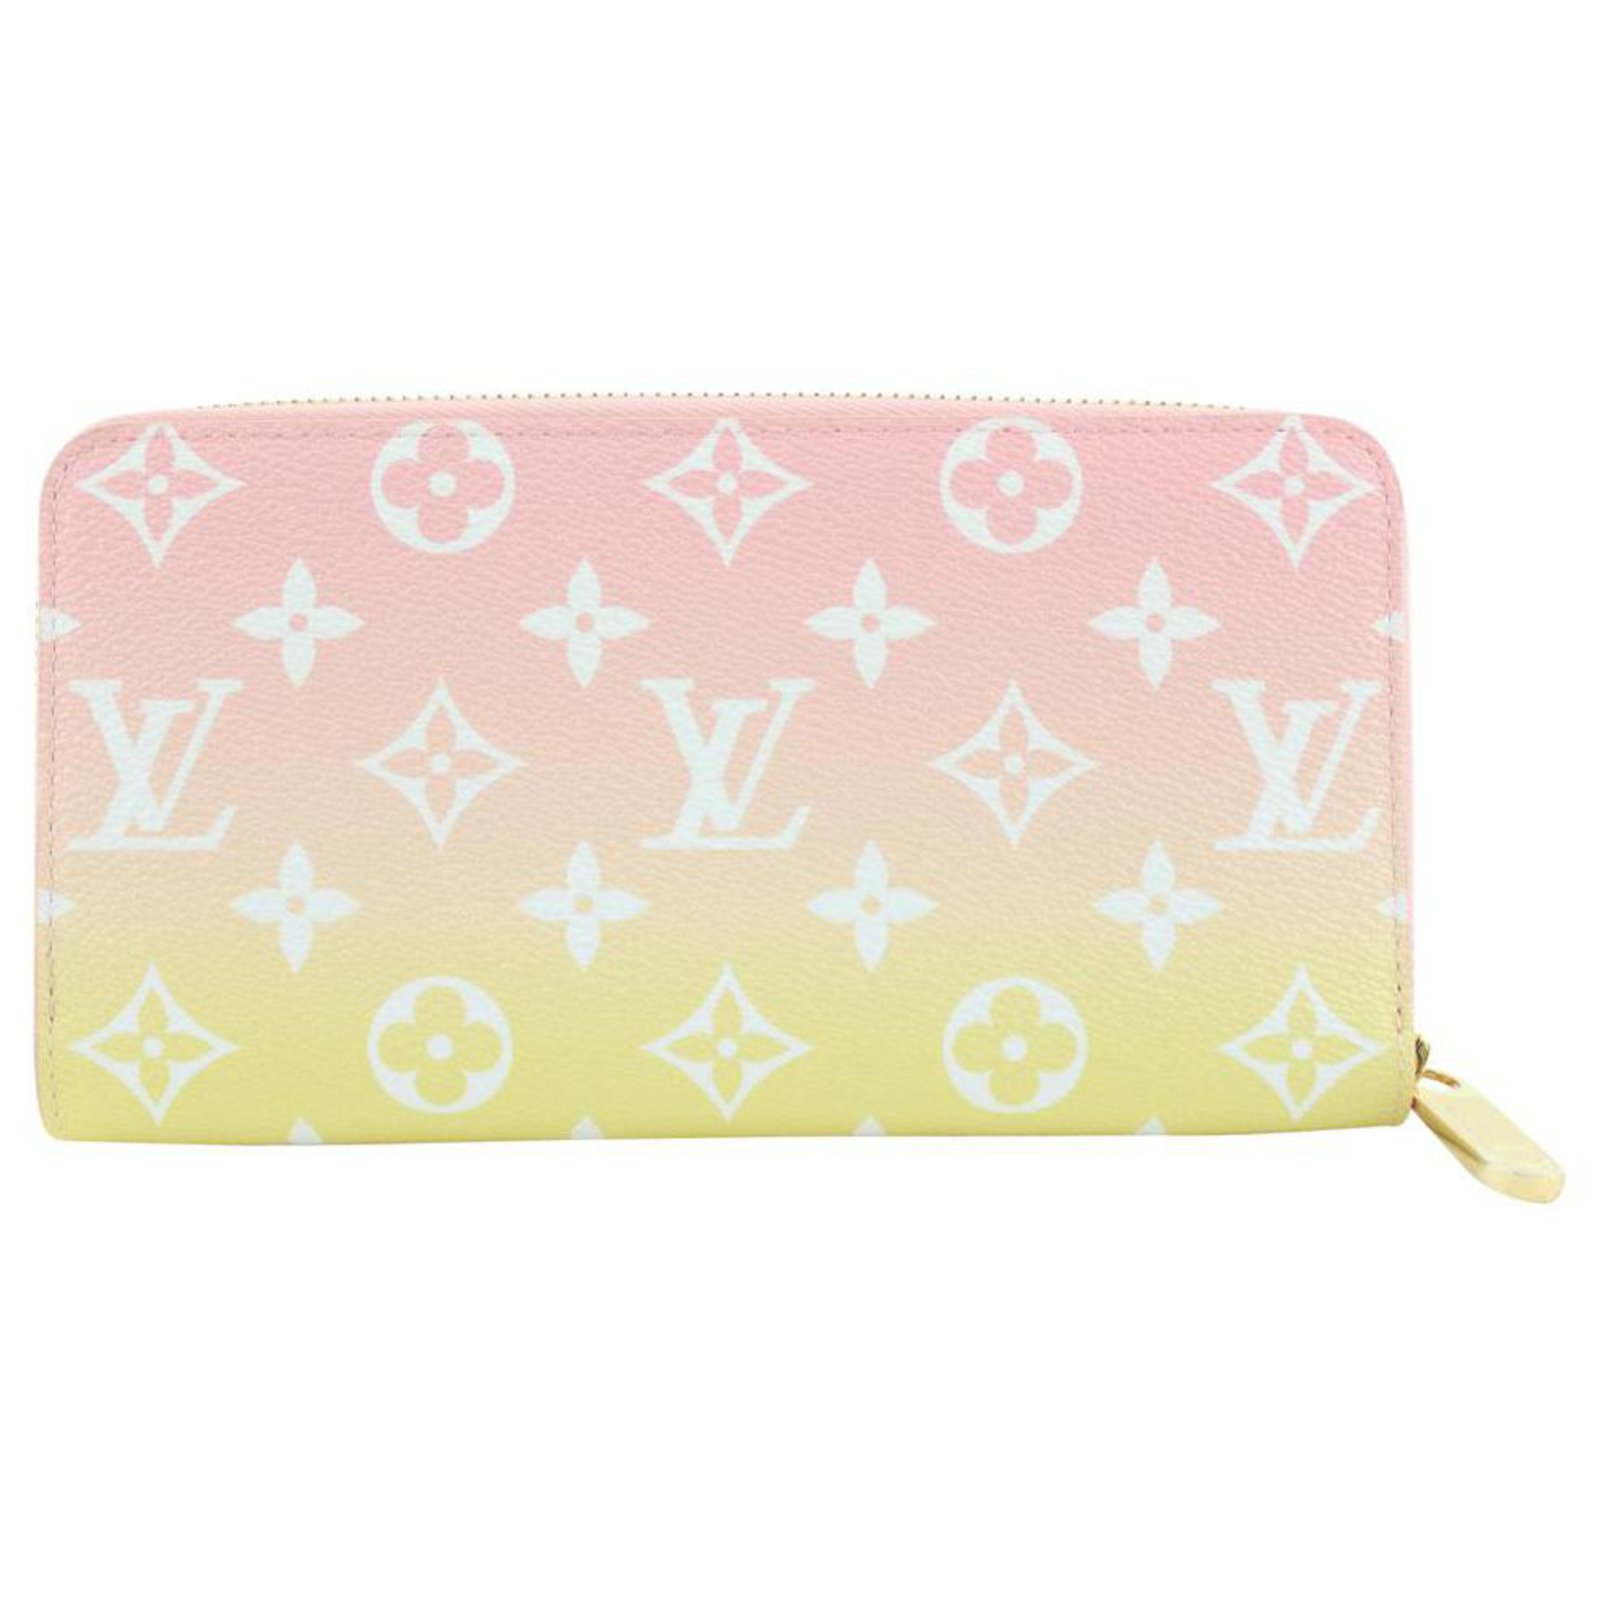 louis-vuitton by the pool pink